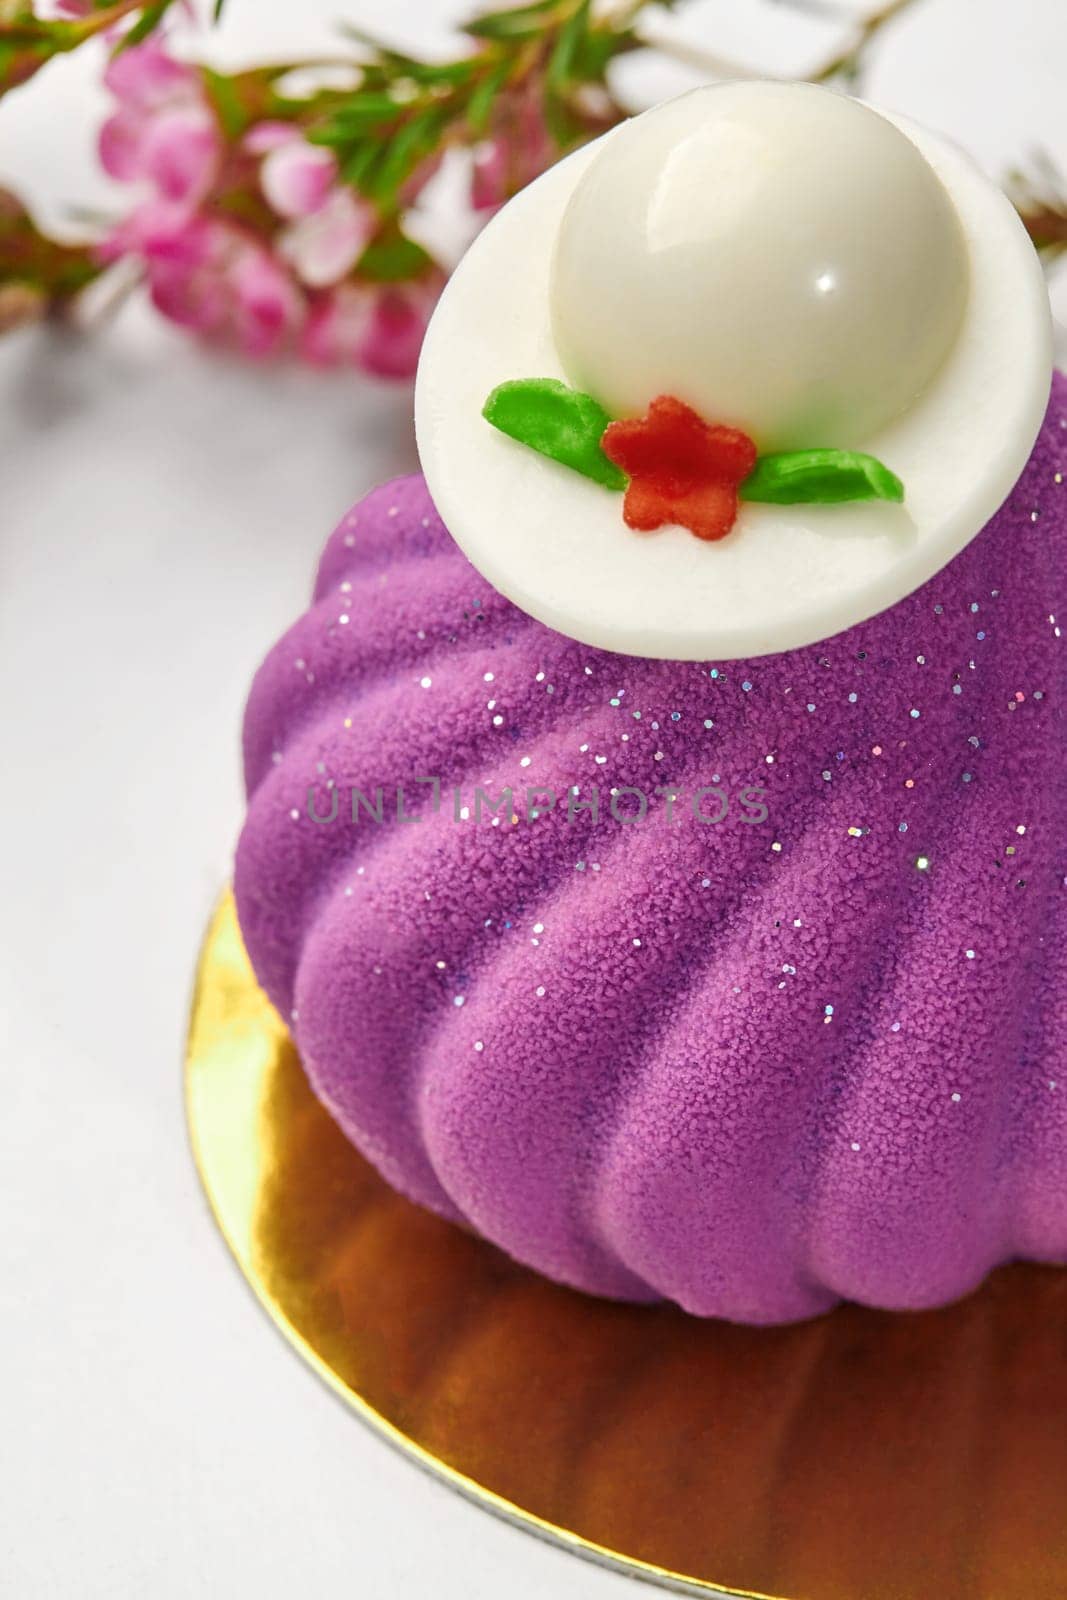 Close-up of velvety texture of luxurious purple mousse pastry topped with white chocolate hat on gold plate, on blurred background with vibrant pink flowers